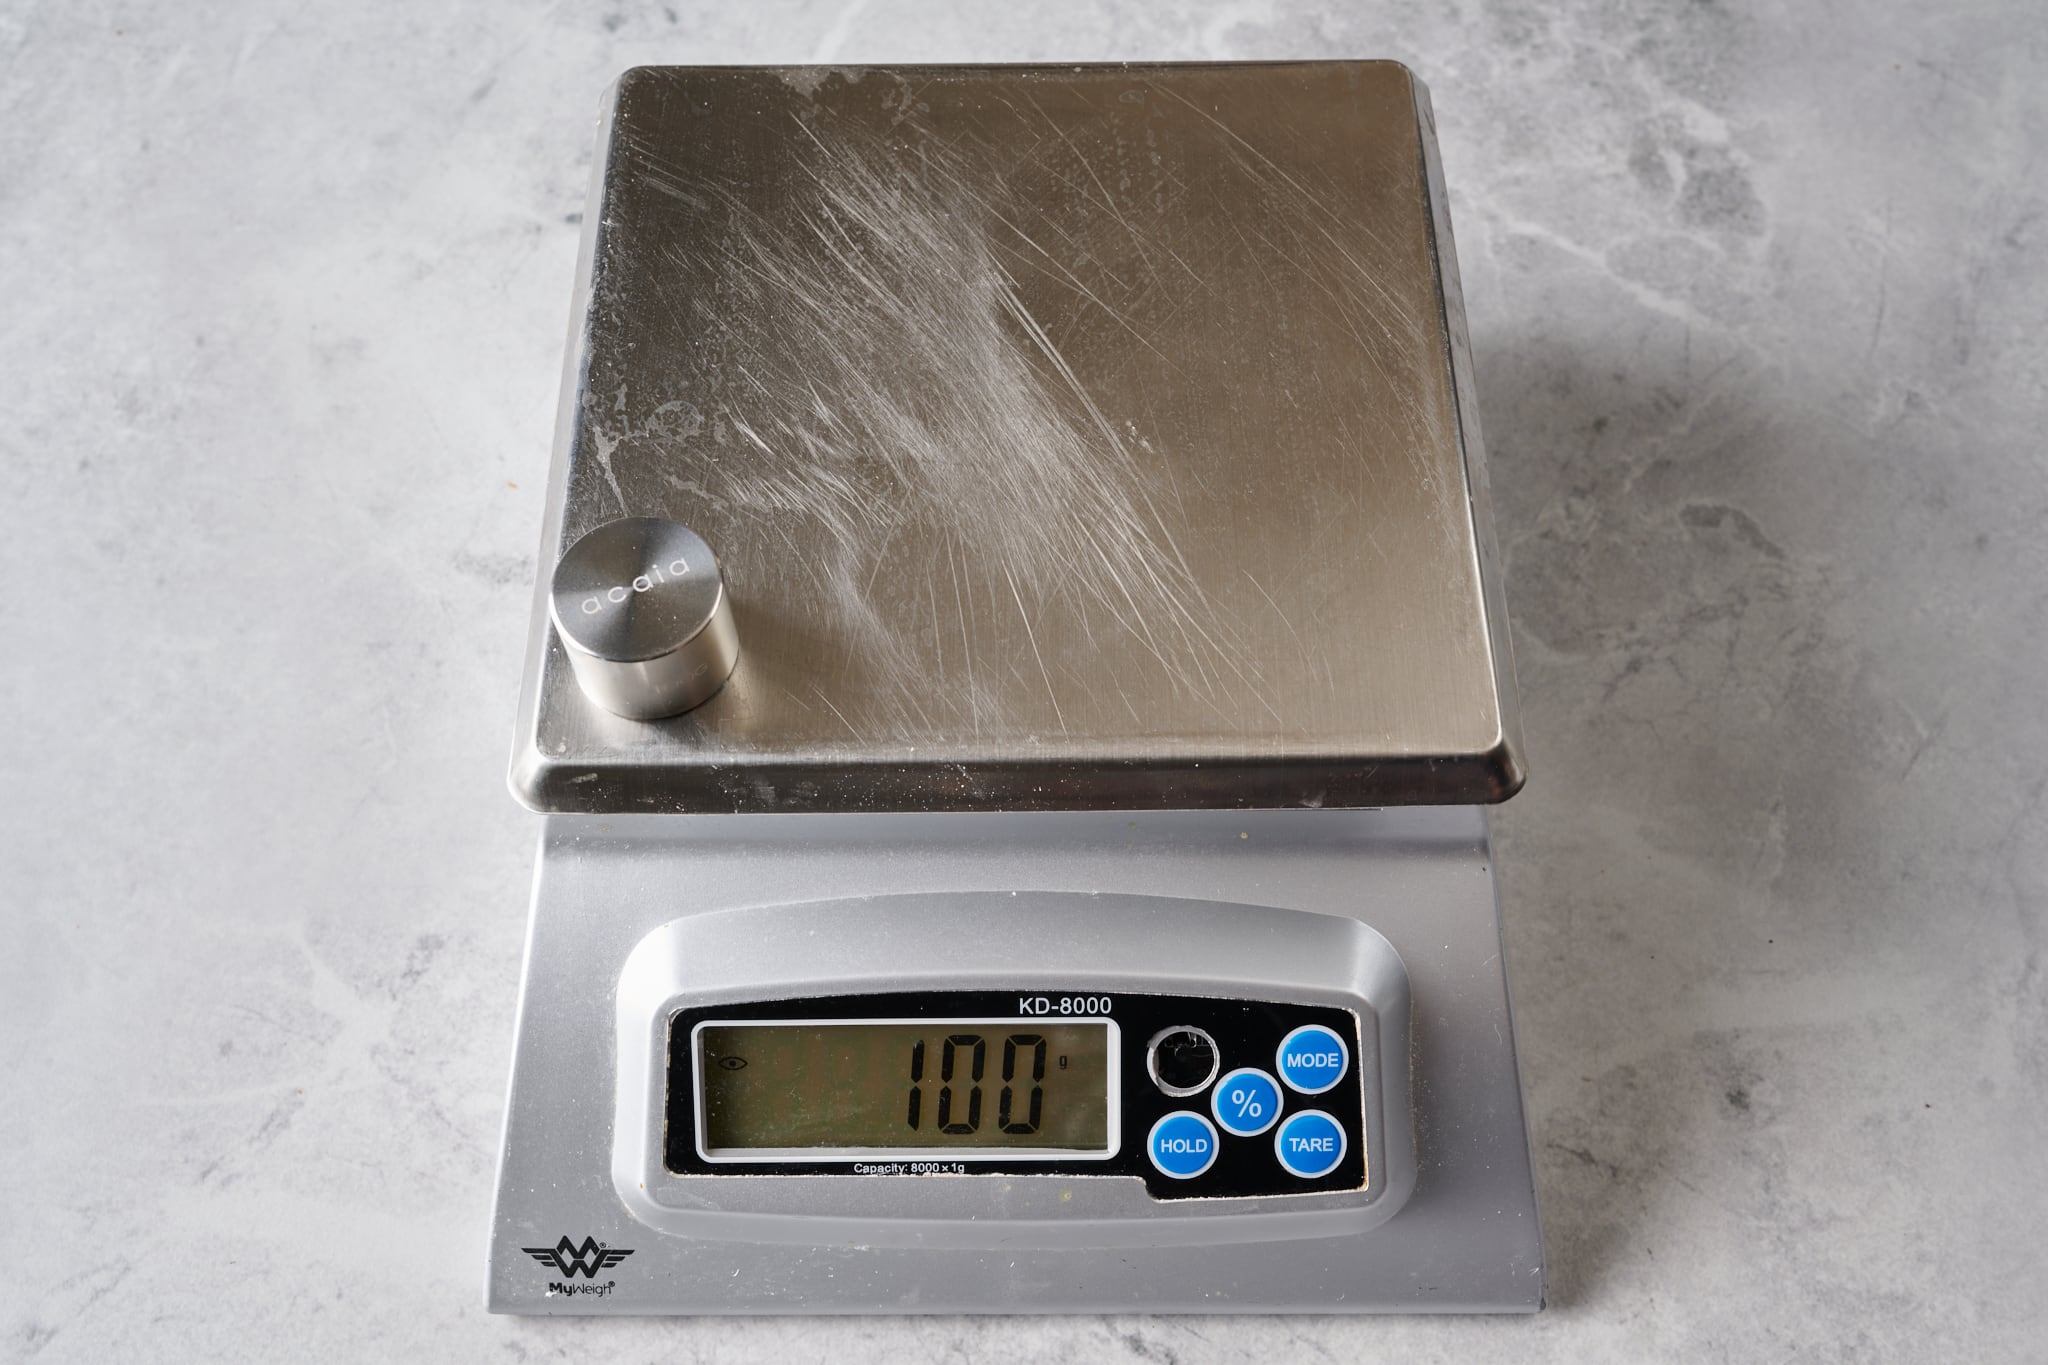 https://www.theperfectloaf.com/wp-content/uploads/2023/01/theperfectloaf_best_kitchen_scale_for_making_bread-6.jpg